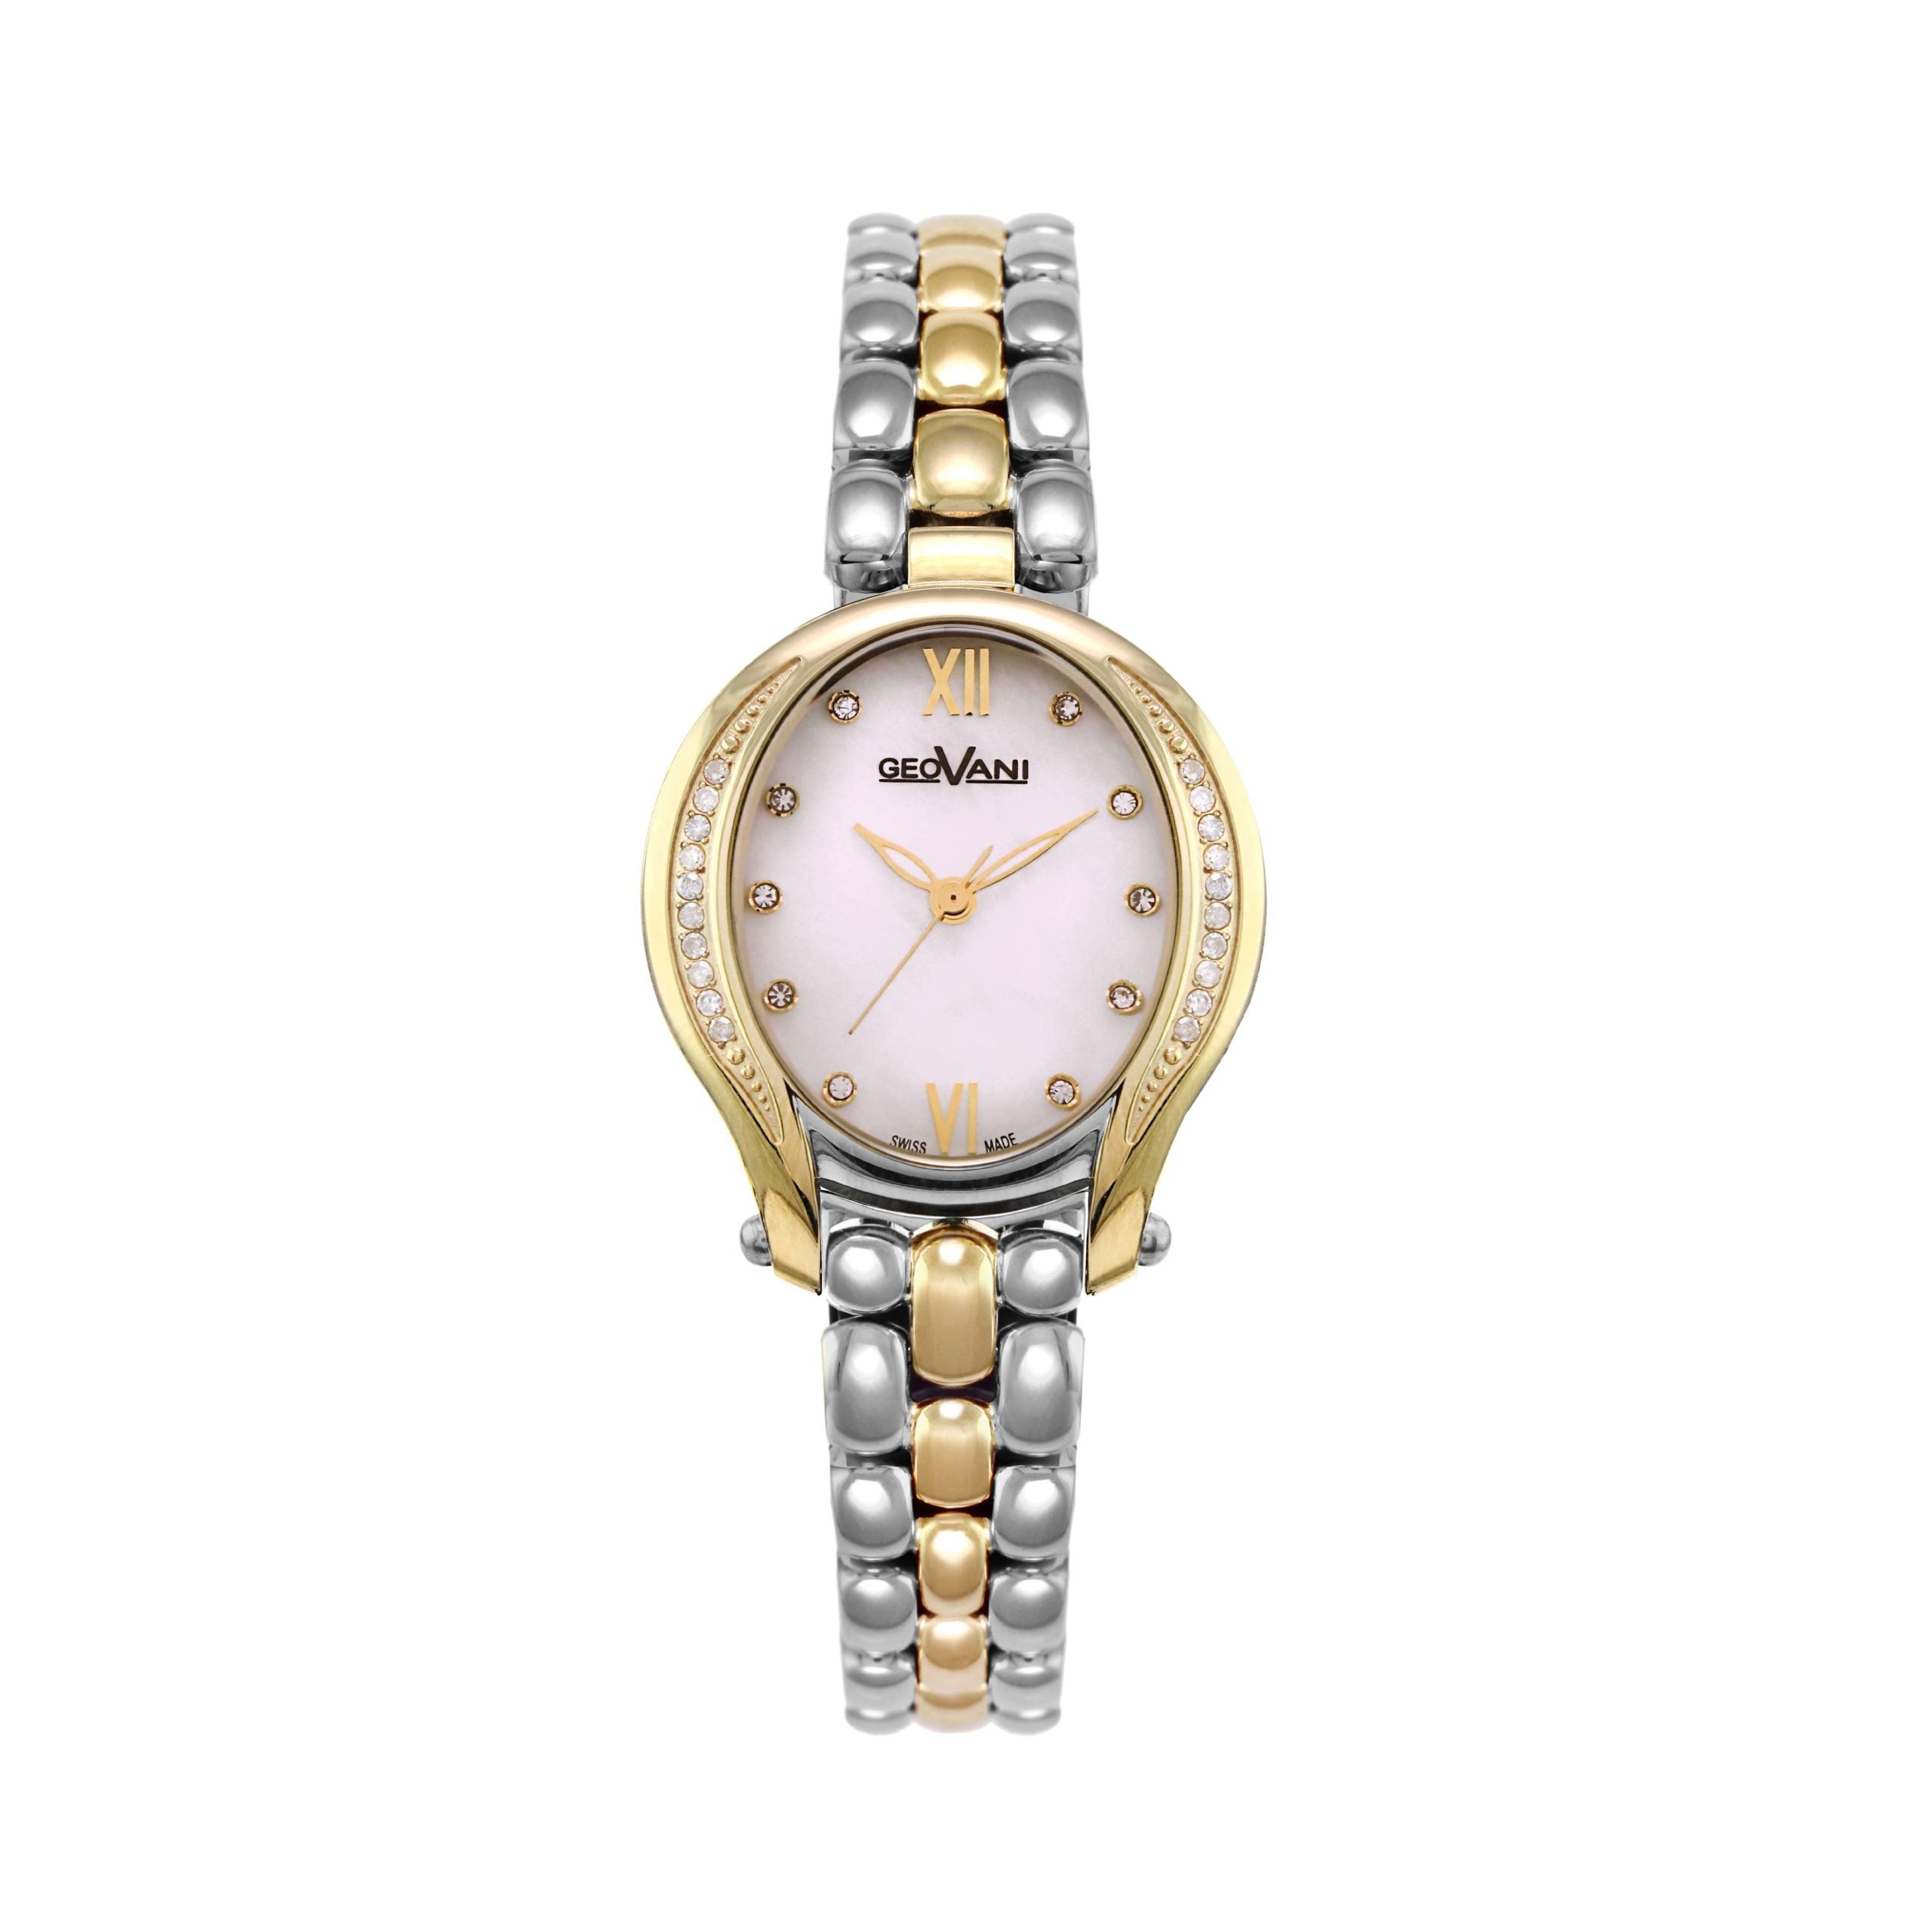 Giovanni Women's Swiss Quartz Watch with Pearly Pink Dial - GEO-0019